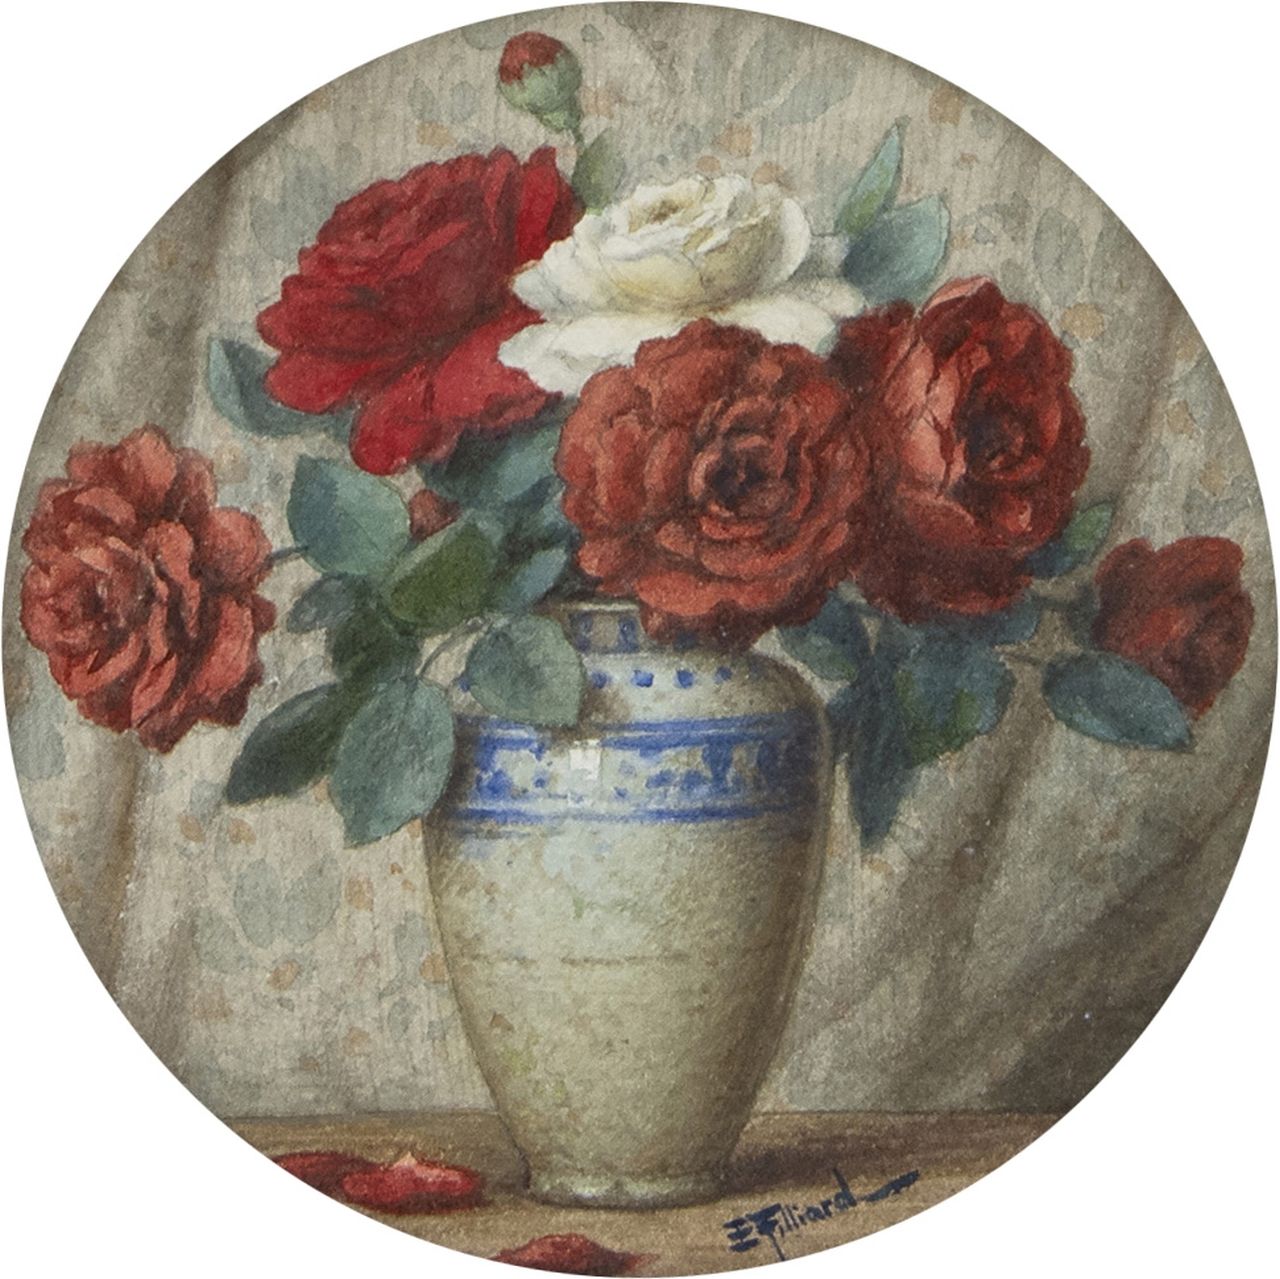 Filliard E.  | Ernest Filliard, A still life with roses, watercolour on paper 14.2 x 14.2 cm, signed l.r.